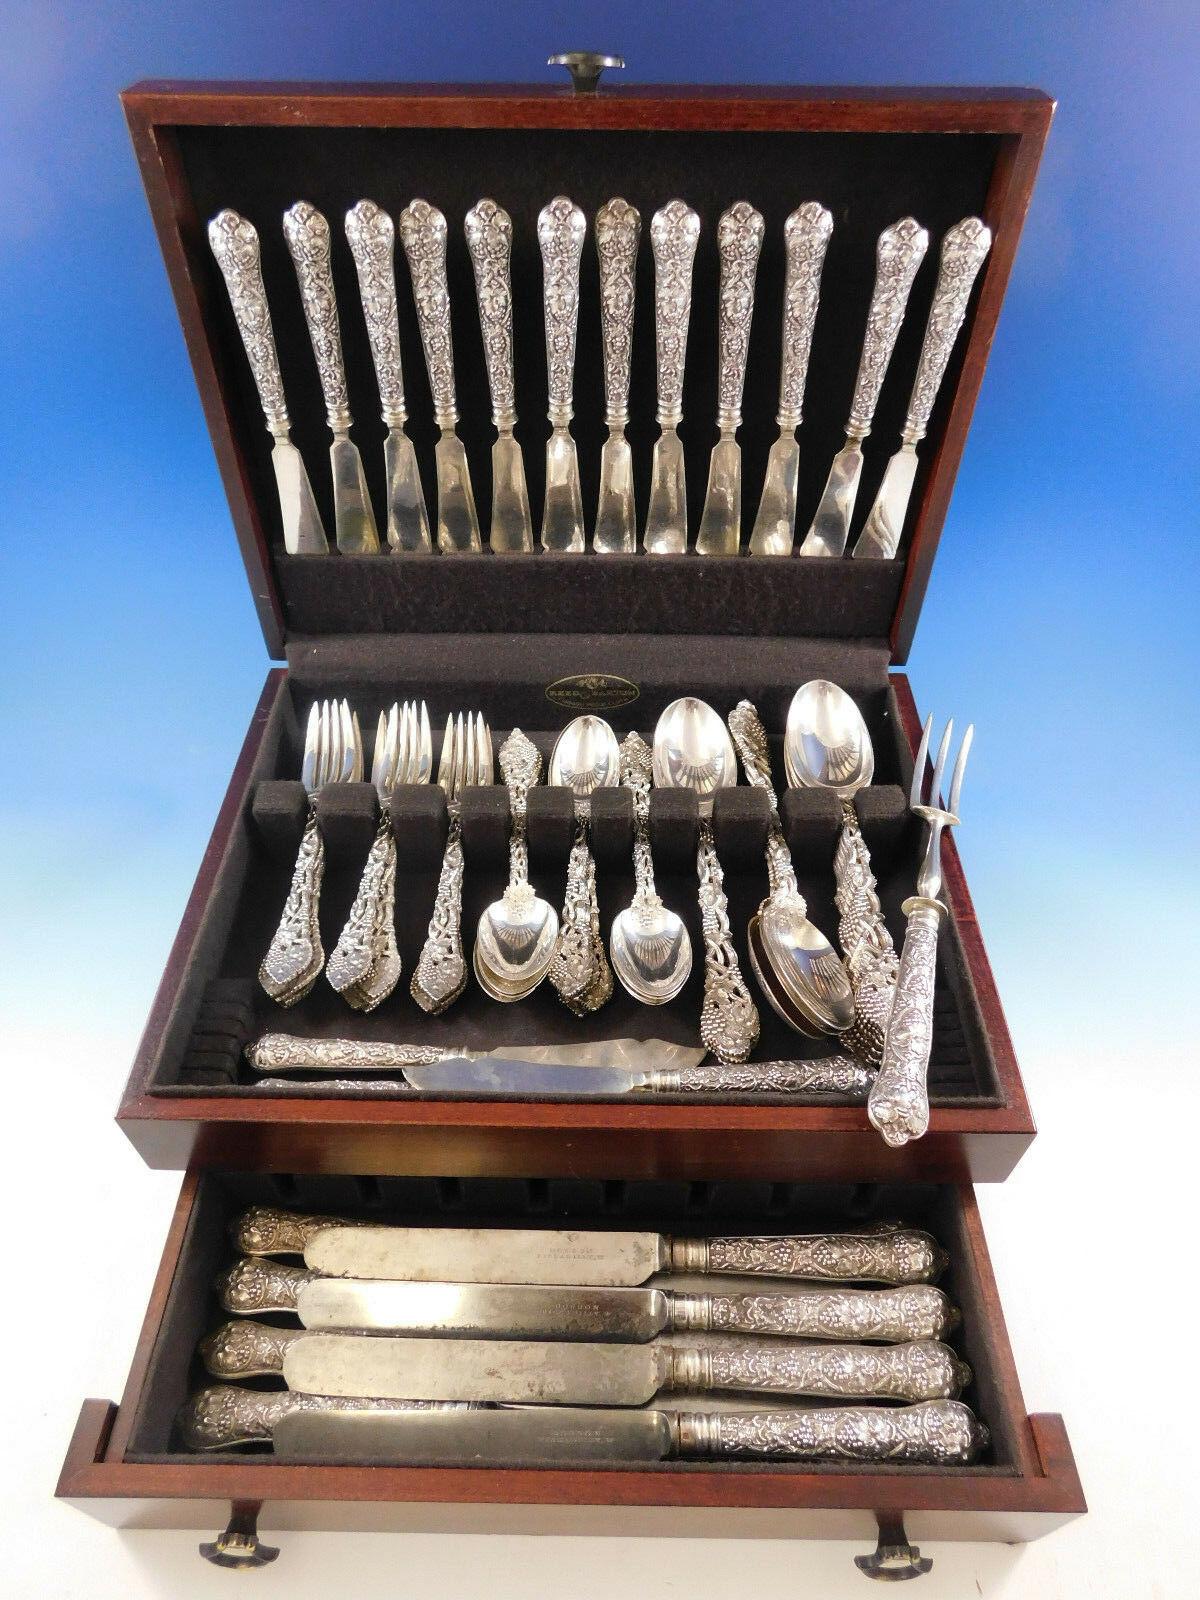 Outstanding chased and pierced vine by Thomas William Dobson (c.1889-1904) Piccadilly, London sterling silver Flatware set, 67 pieces. This pattern features a grape motif with openwork handles in the shape of entwined grape vines, leaves, and